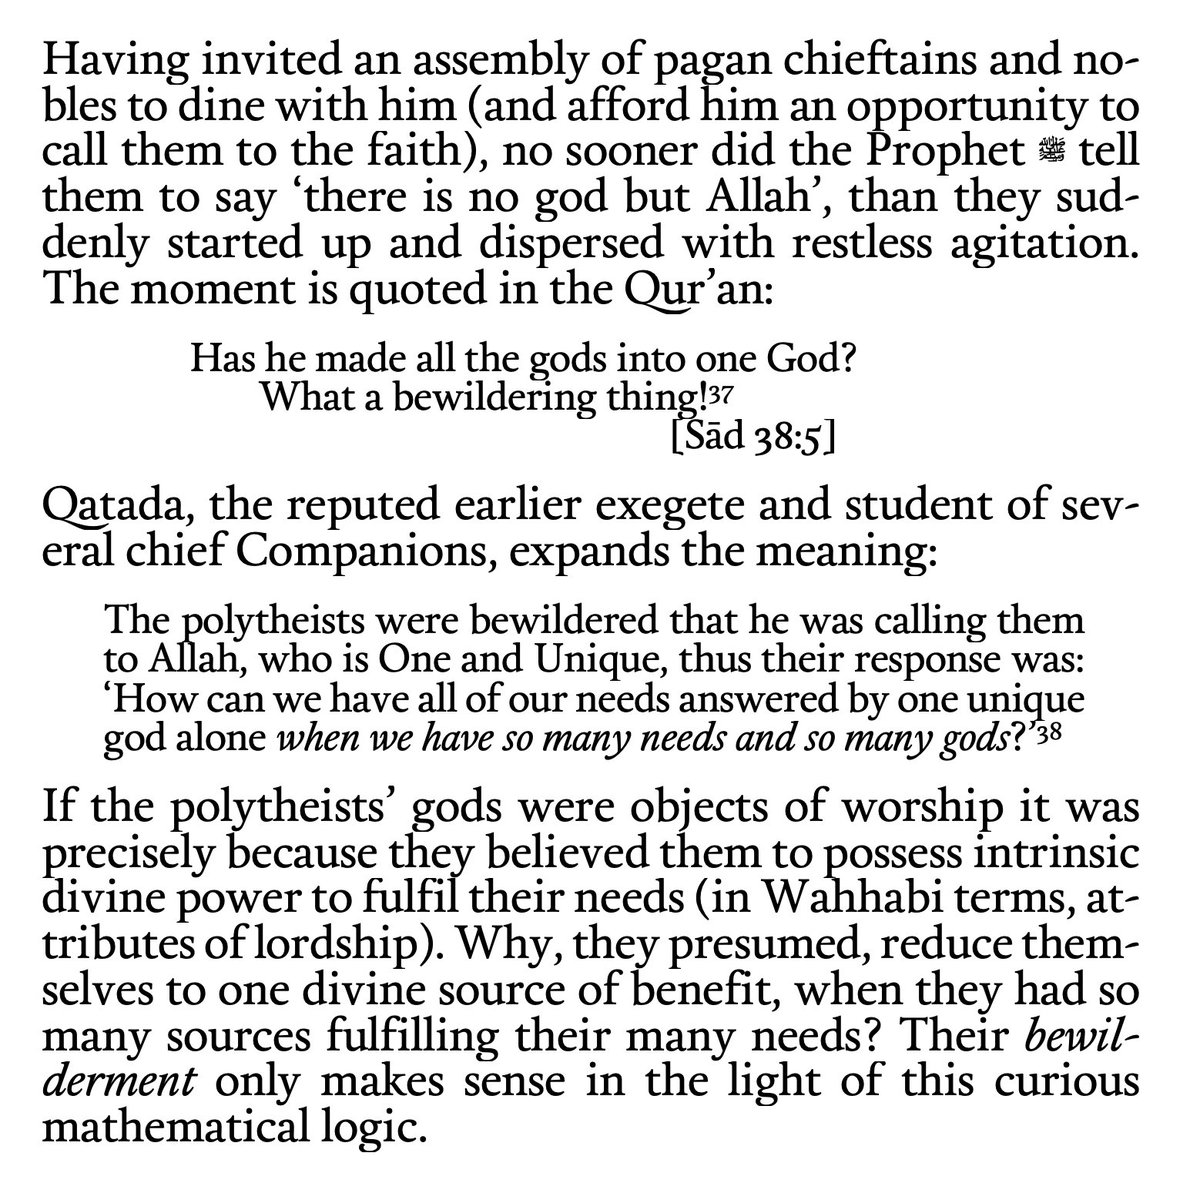 7) The Jahili Arabs were no different. Read the following screenshot from my book regarding why the mushrikun did not give up their gods easily. The tafsir is from Sheikhul Islam Ibnul Jawzi who narrates the commentary from the great tabi'in and exegete, Qatada.